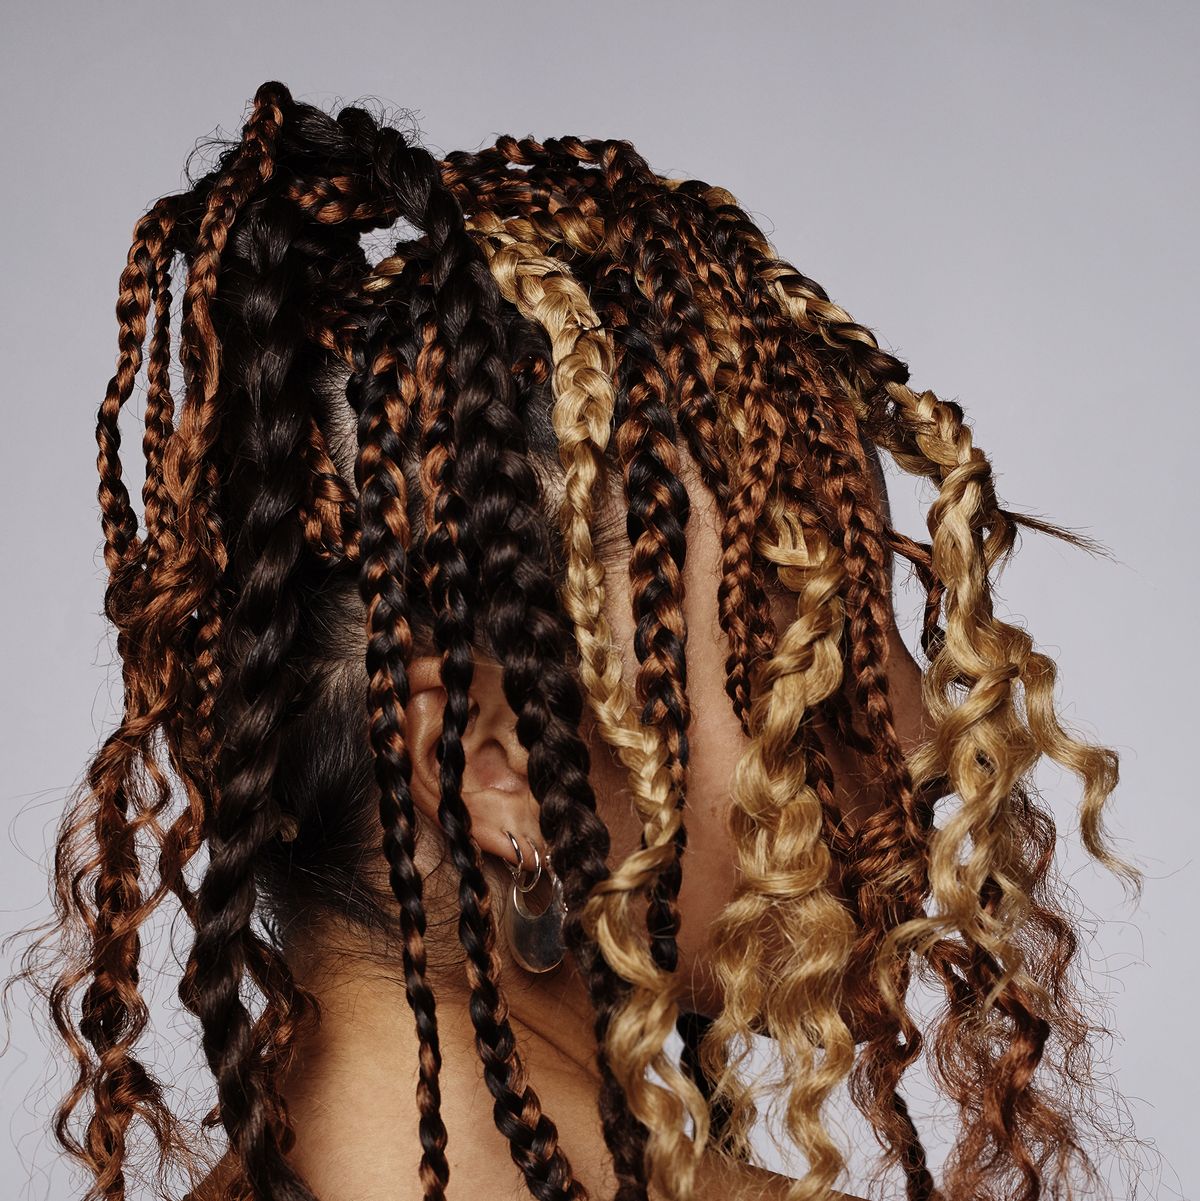 History of Braids: More Than Just a Hairstyle